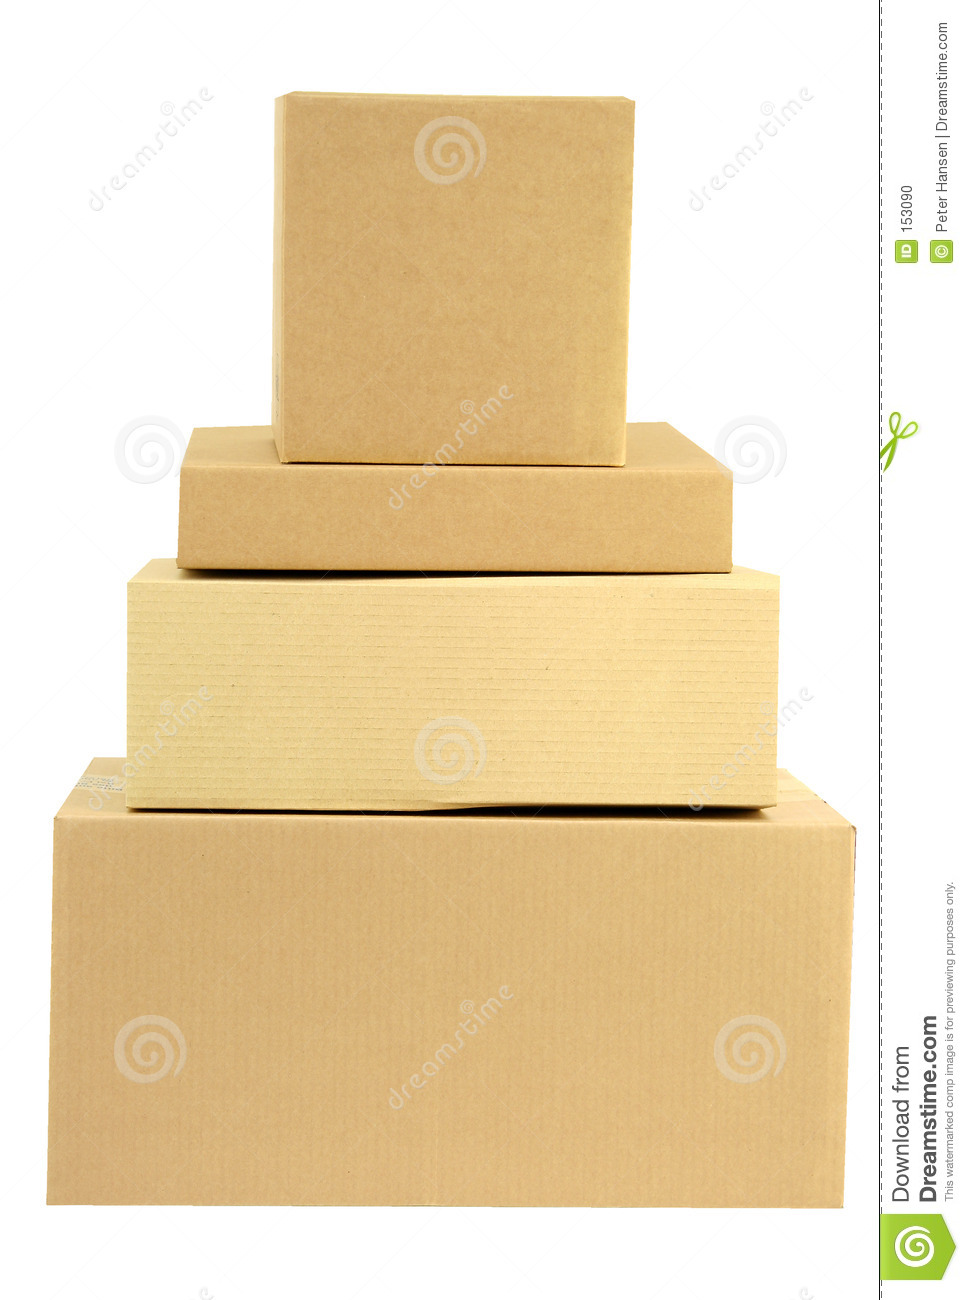 Pile Of Boxes Stacked Stock Photo   Image  153090